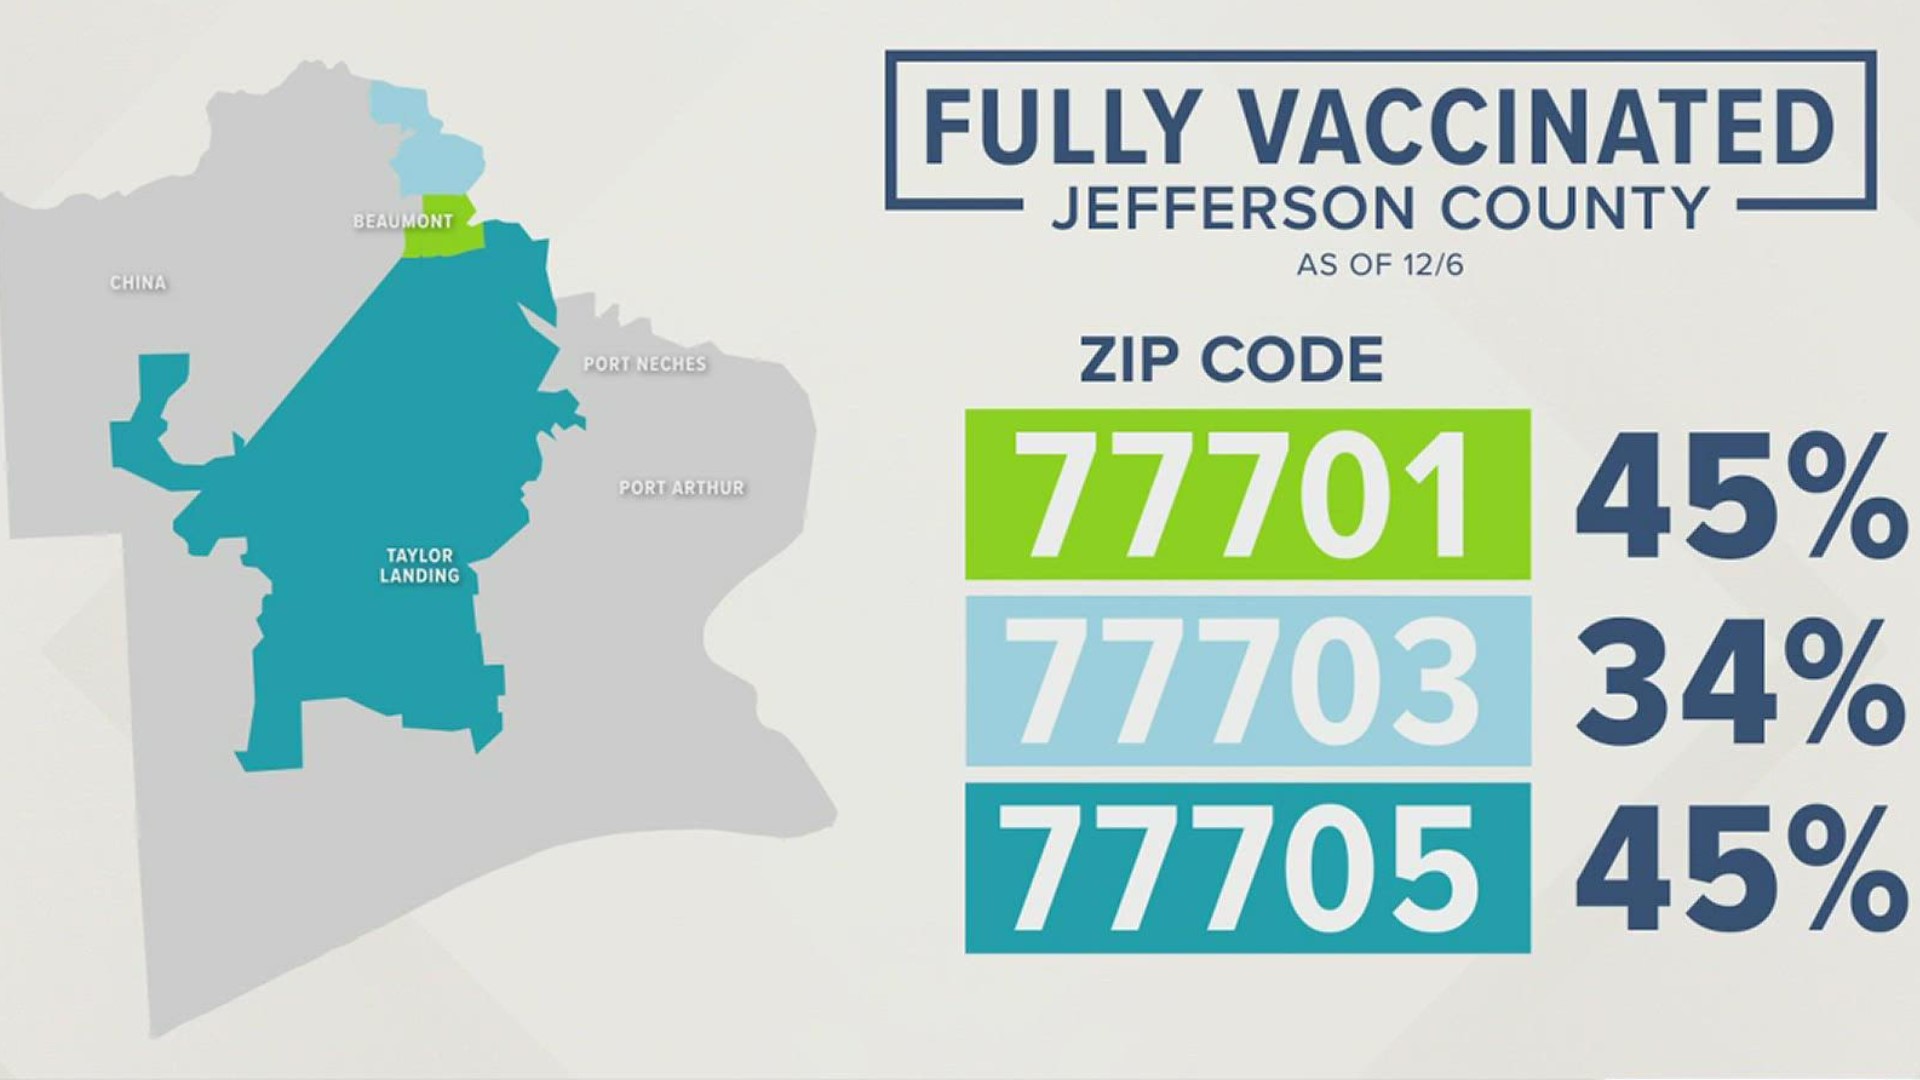 77701, 77705, and 77703 are the three zip codes that share one thing in common.